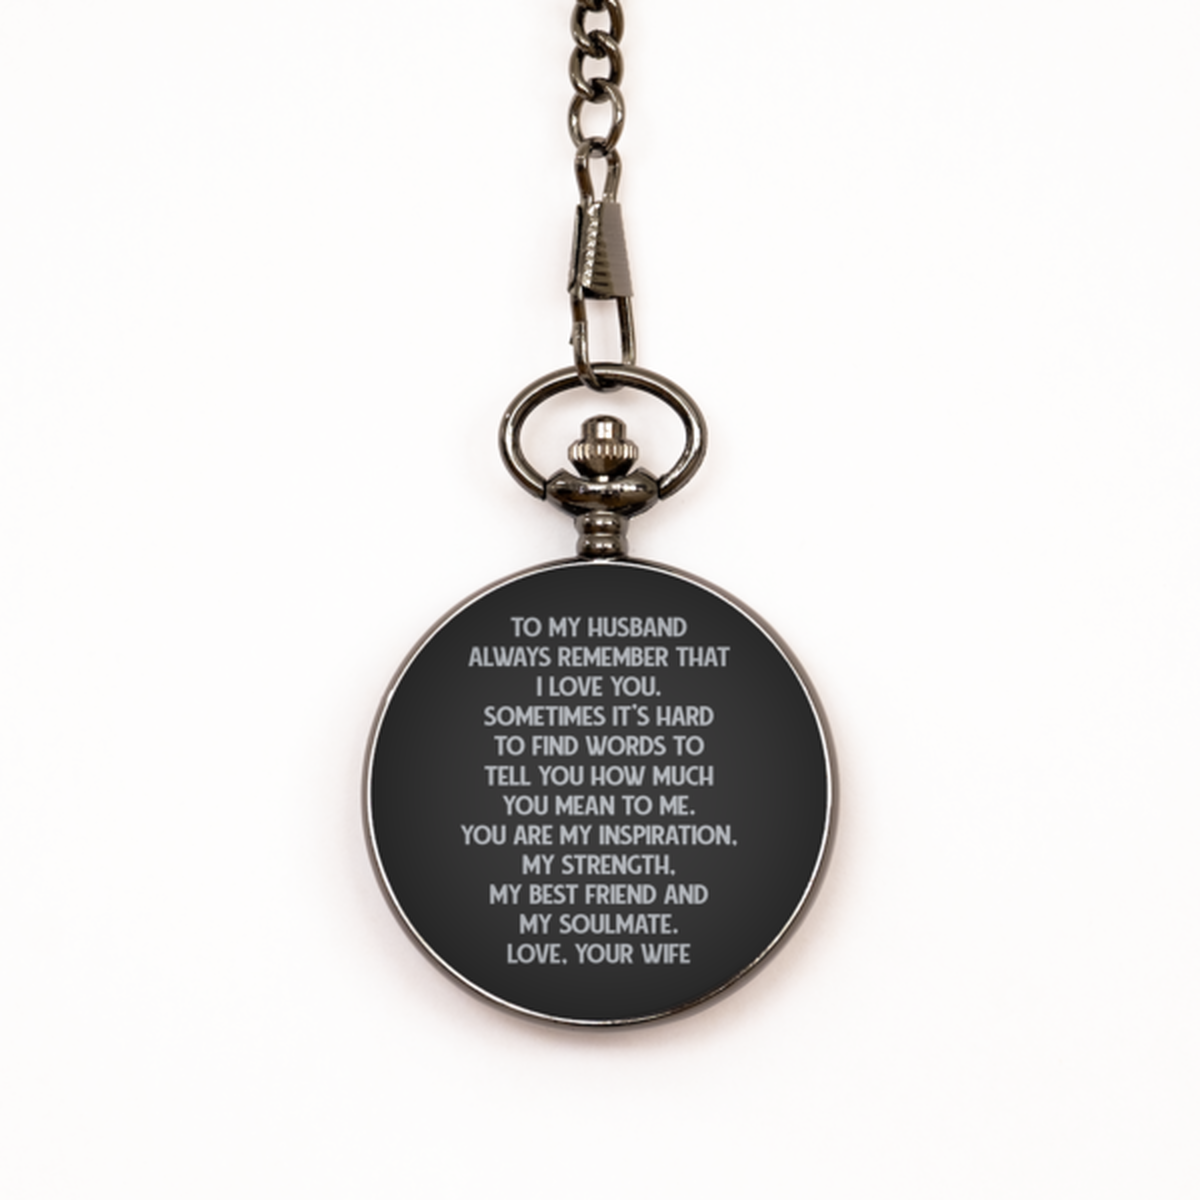 To My Husband Black Pocket Watch, Always Remember That I Love You, Anniversary Gifts For Husband From Wife, Birthday Gifts For Men